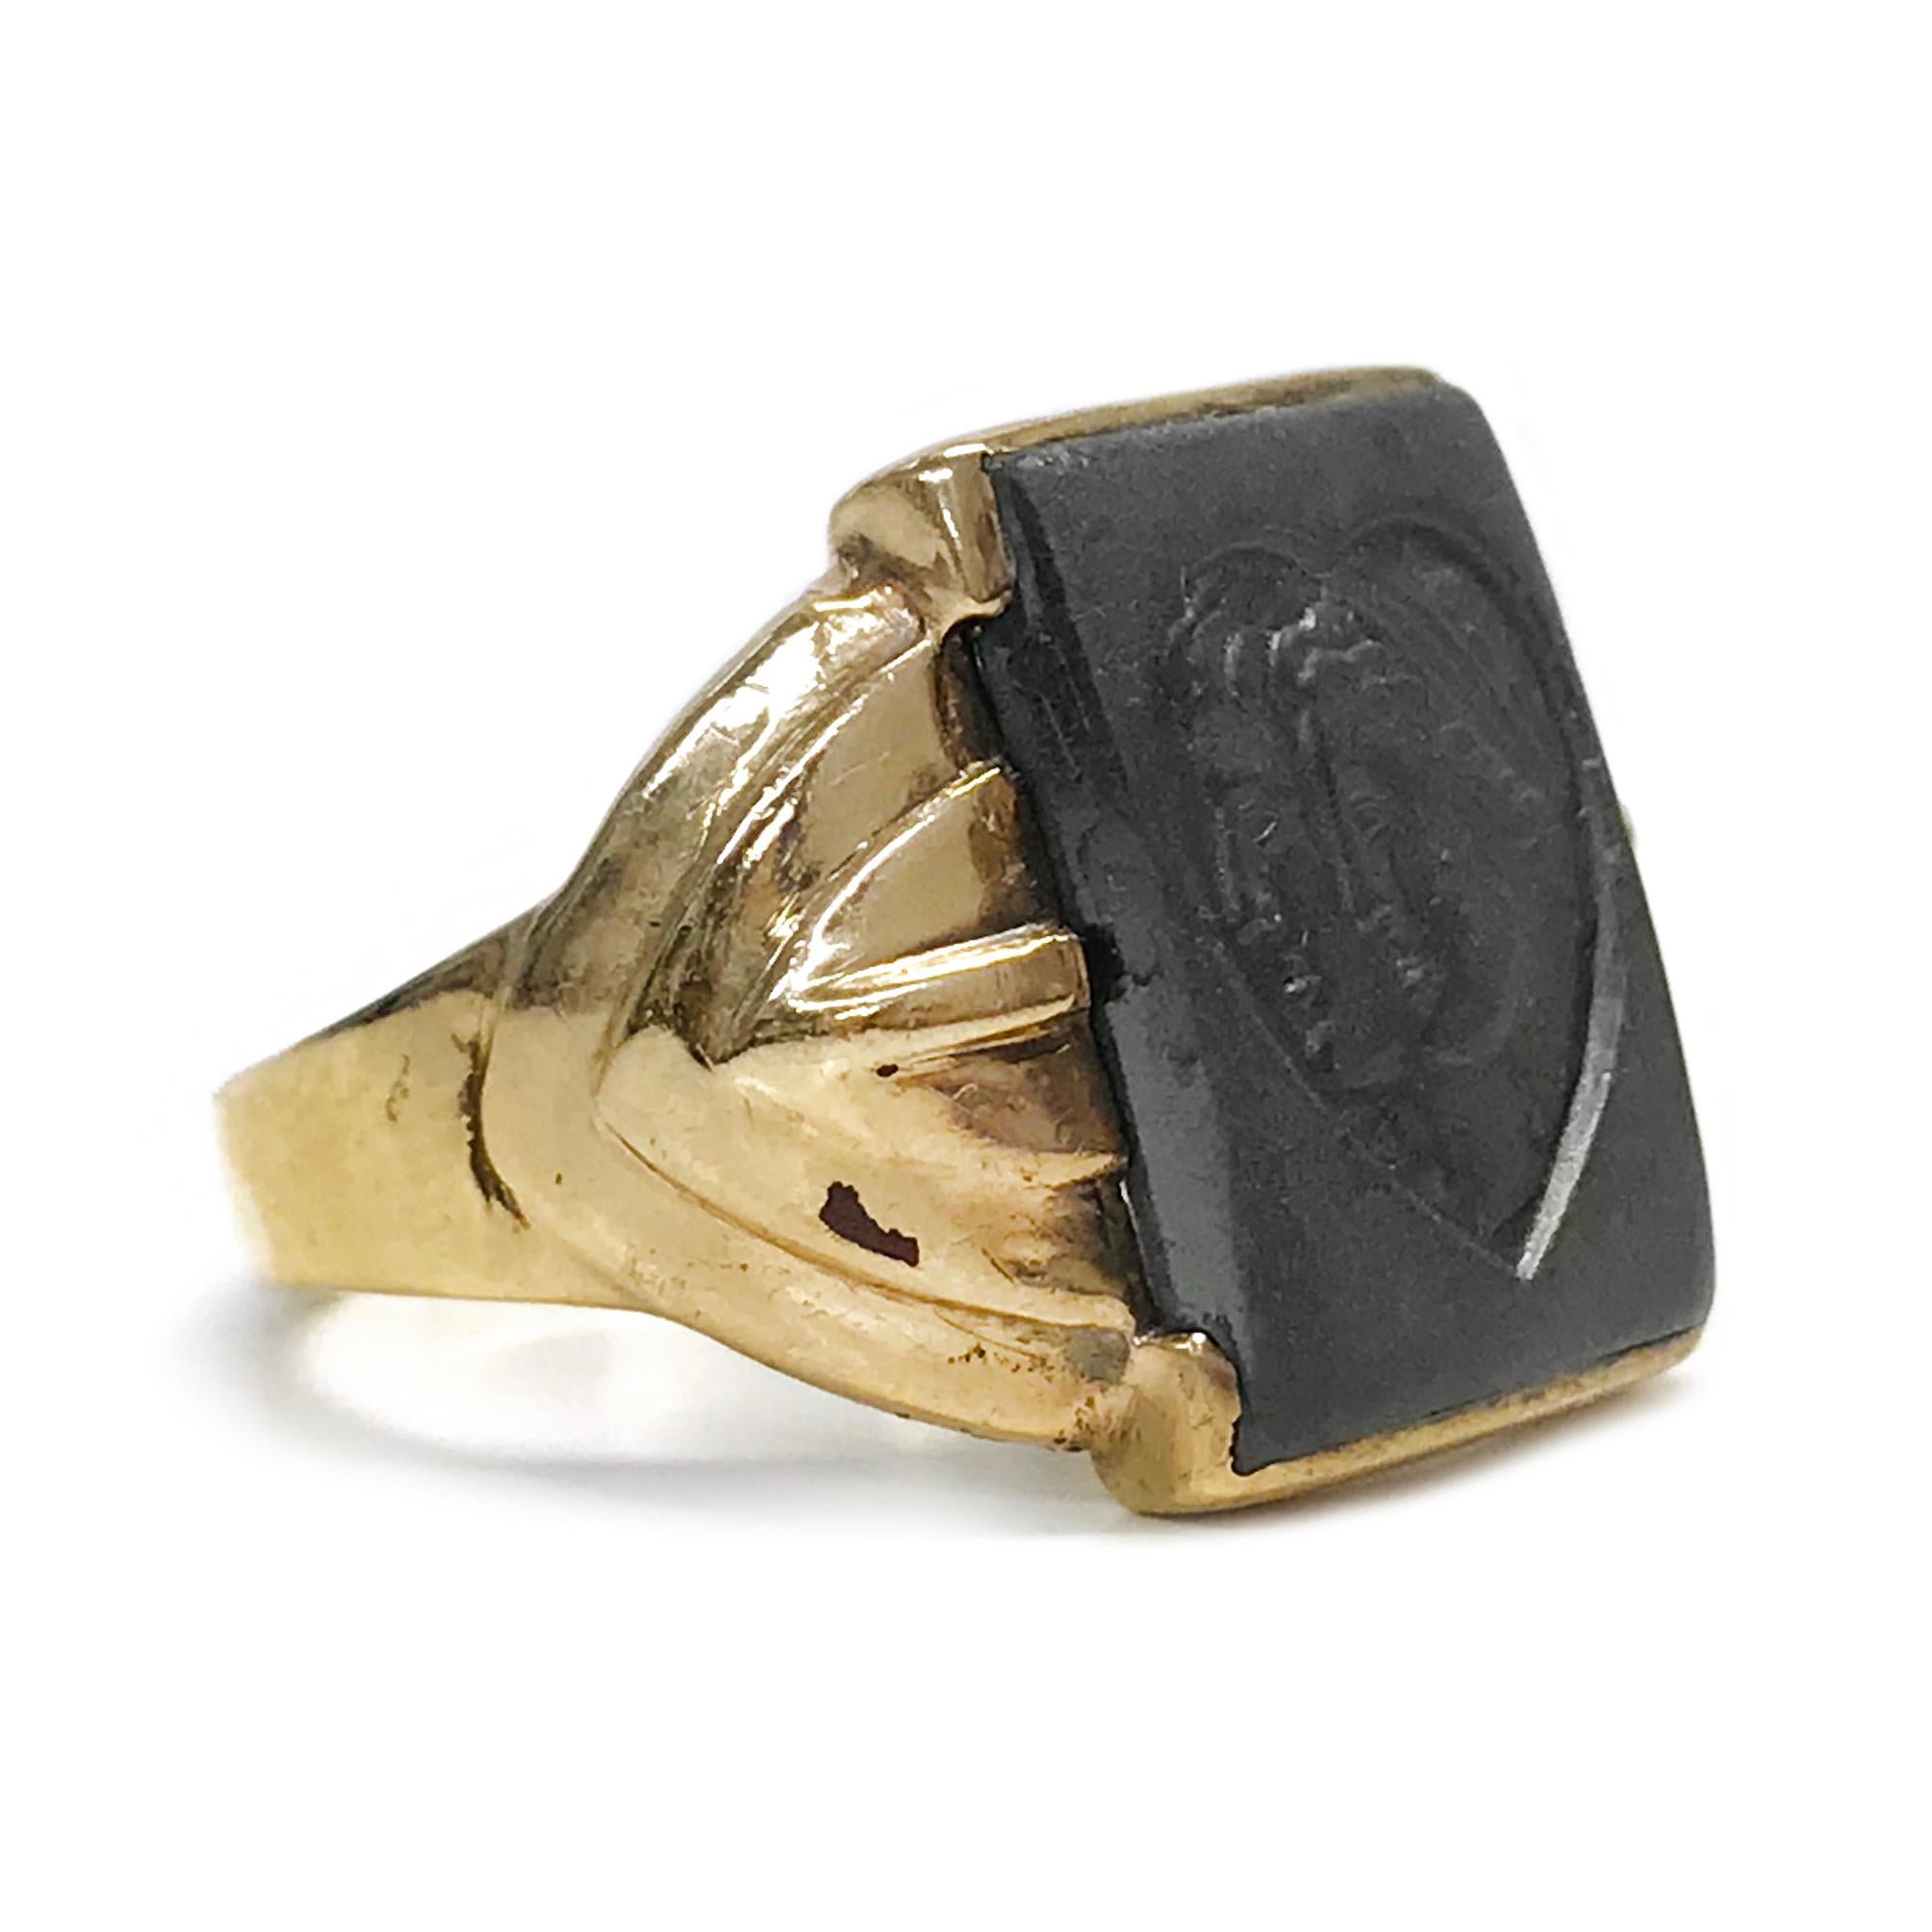 10 Karat Art Deco Hematite Intaglio Ring. The wide-band has an Art Deco motif and a smooth shiny finish. The center of the ring is a 15.86mm x 11.92mm Hematite Intaglio with a heart and a Roman couple. Stamped on the inside of the band is 10K. The